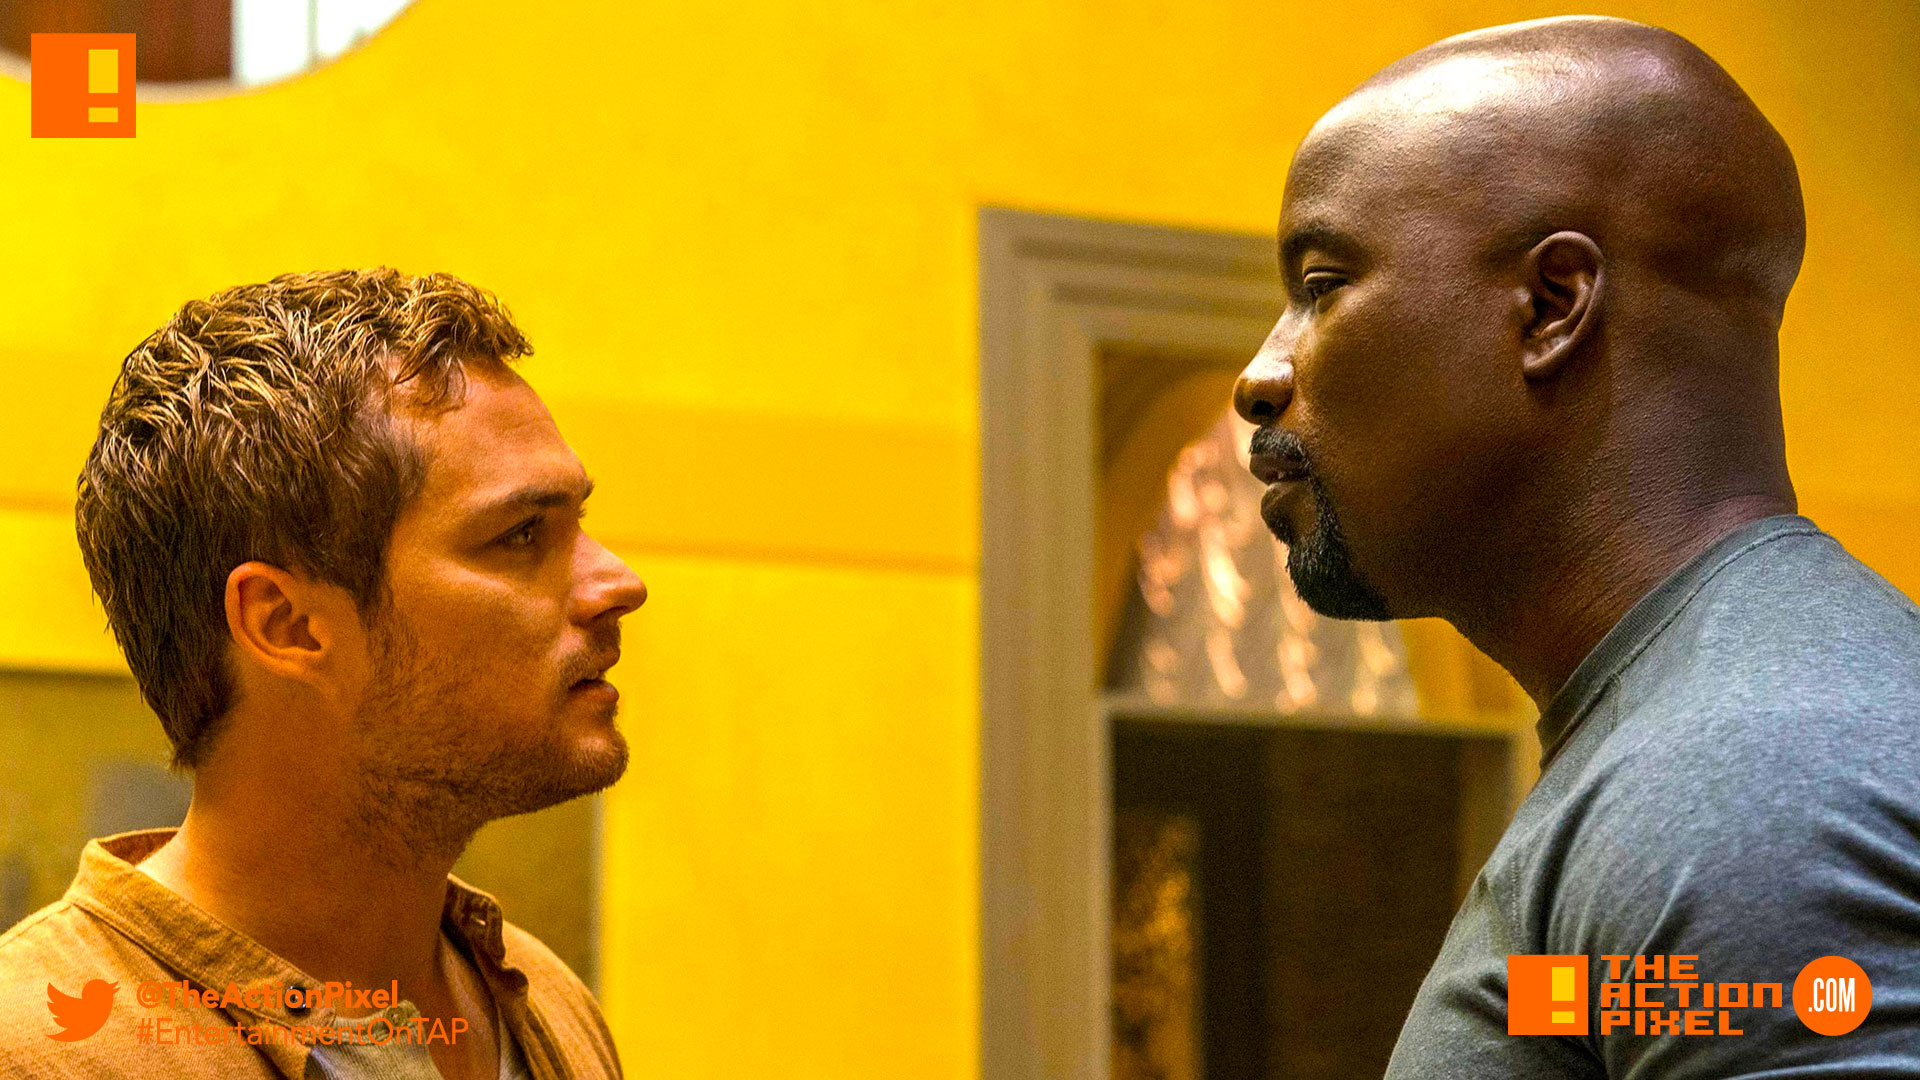 iron fist, luke cage, marvel, marvel entertainment, netflix, the defenders, defend, defenders, mike colter, iron fist, luke cage, luke cage season 2, season 2, photo, still, entertainment on tap, the action pixel,